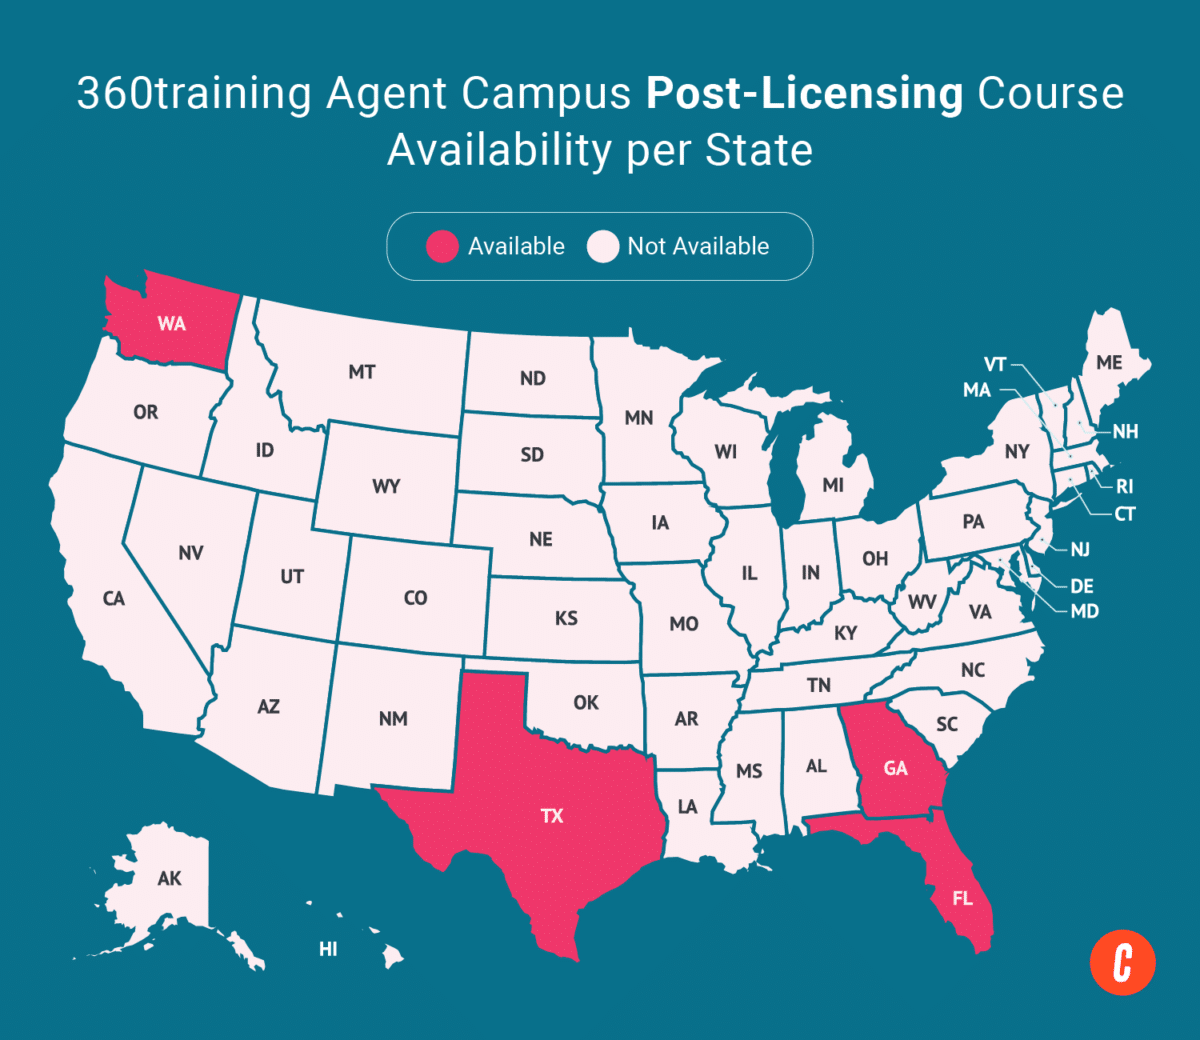 A U.S. map with states where 360training's available post-licensing courses are shaded